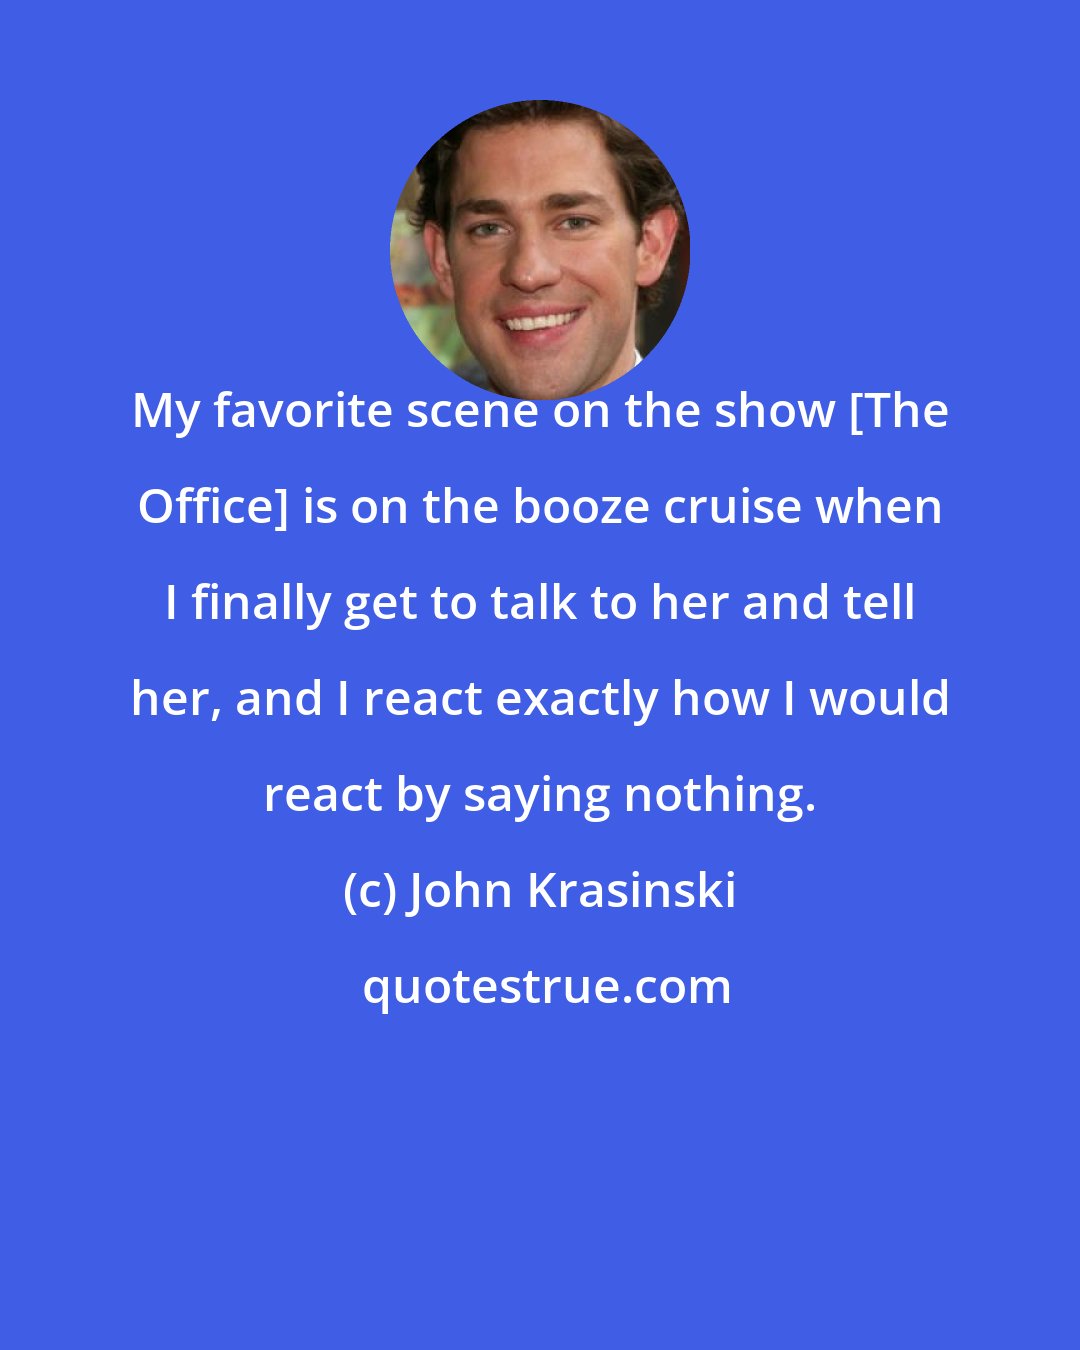 John Krasinski: My favorite scene on the show [The Office] is on the booze cruise when I finally get to talk to her and tell her, and I react exactly how I would react by saying nothing.